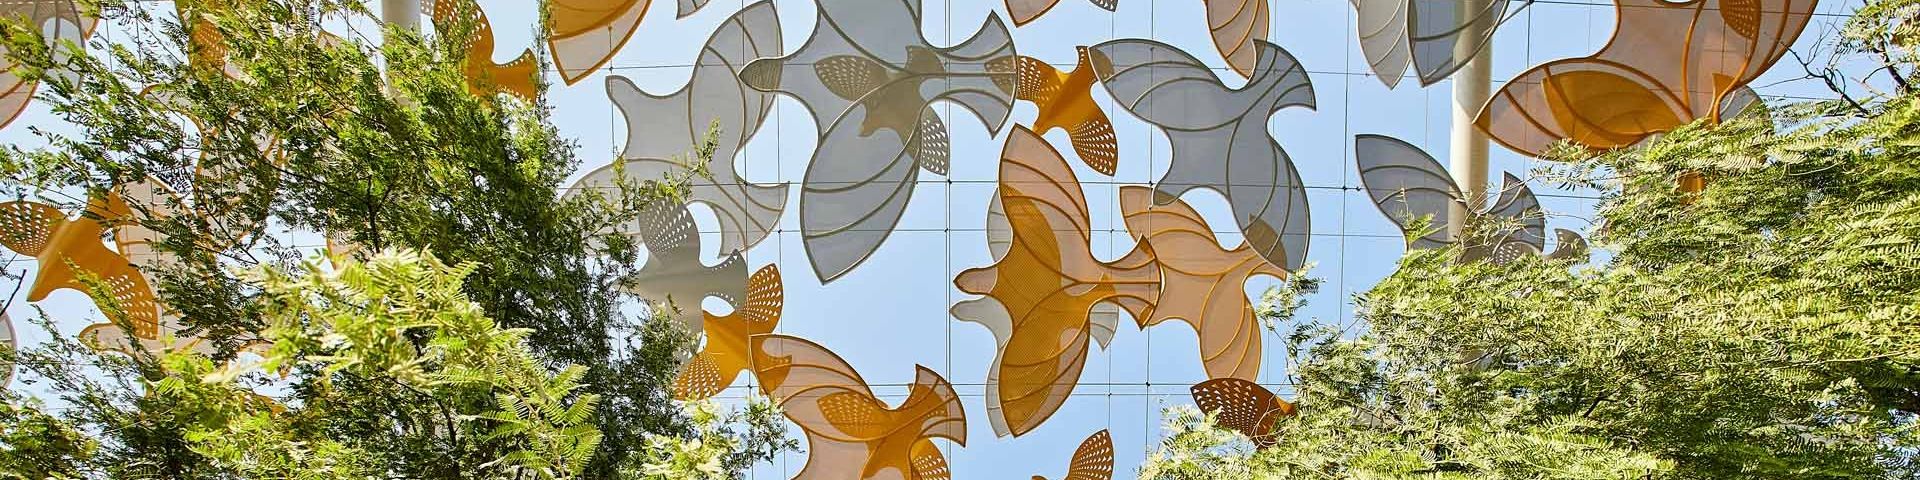 Cut out orange and grey shapes of birds, against a blue sky, with trees on either side. This is the view from beneath of a section of the Terra Sustainability Pavilion at Expo Dubai 2020.